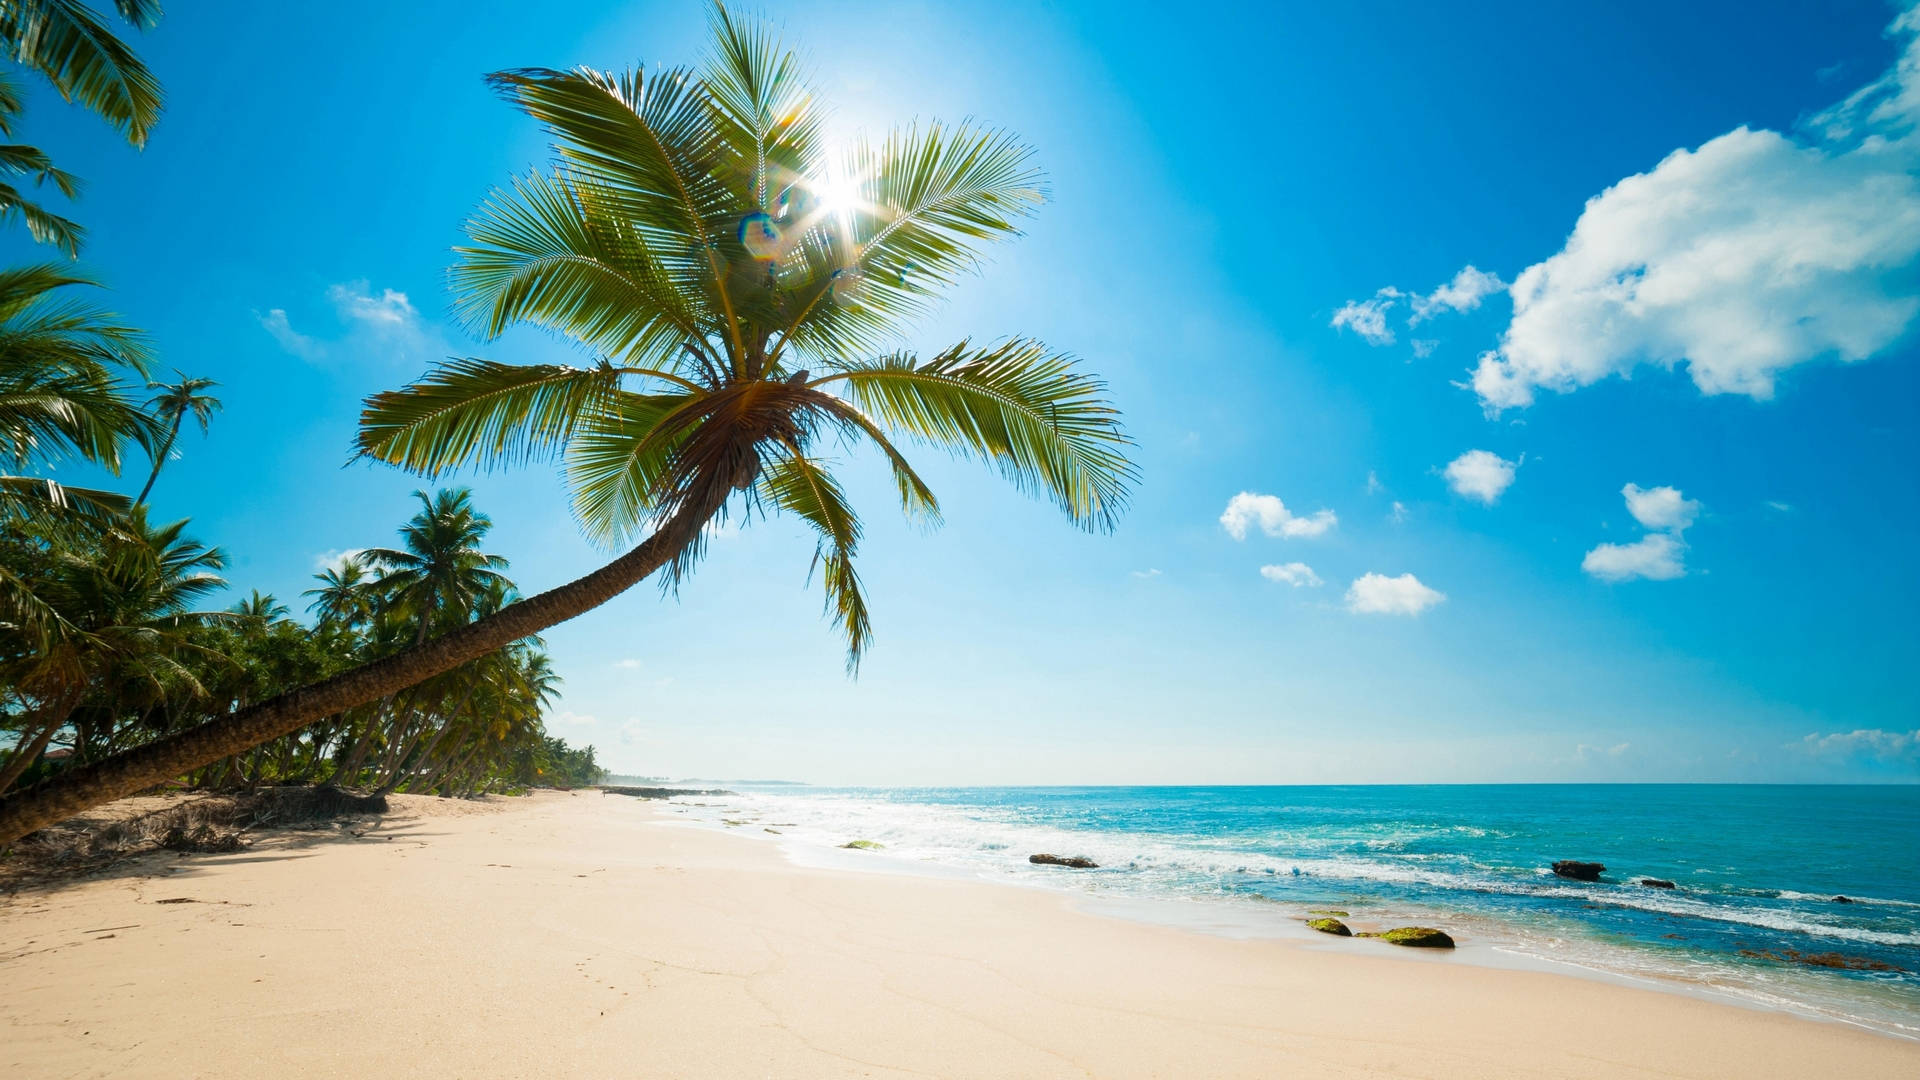 Free Coconut Tree Wallpaper Downloads, [100+] Coconut Tree Wallpapers for  FREE 